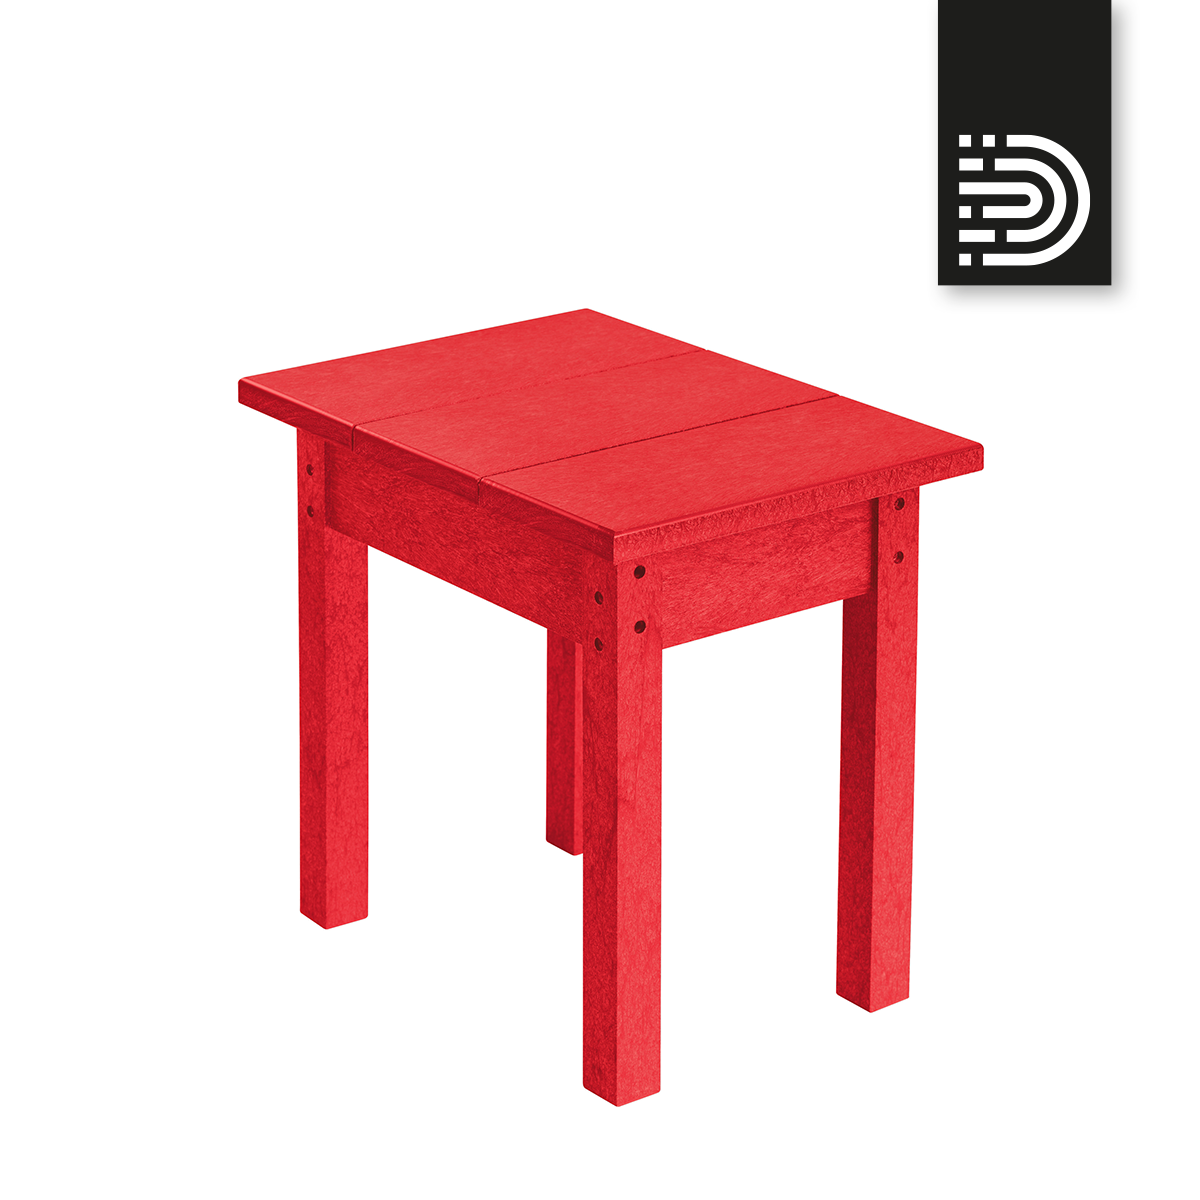 T01 small rectangular table - red 01